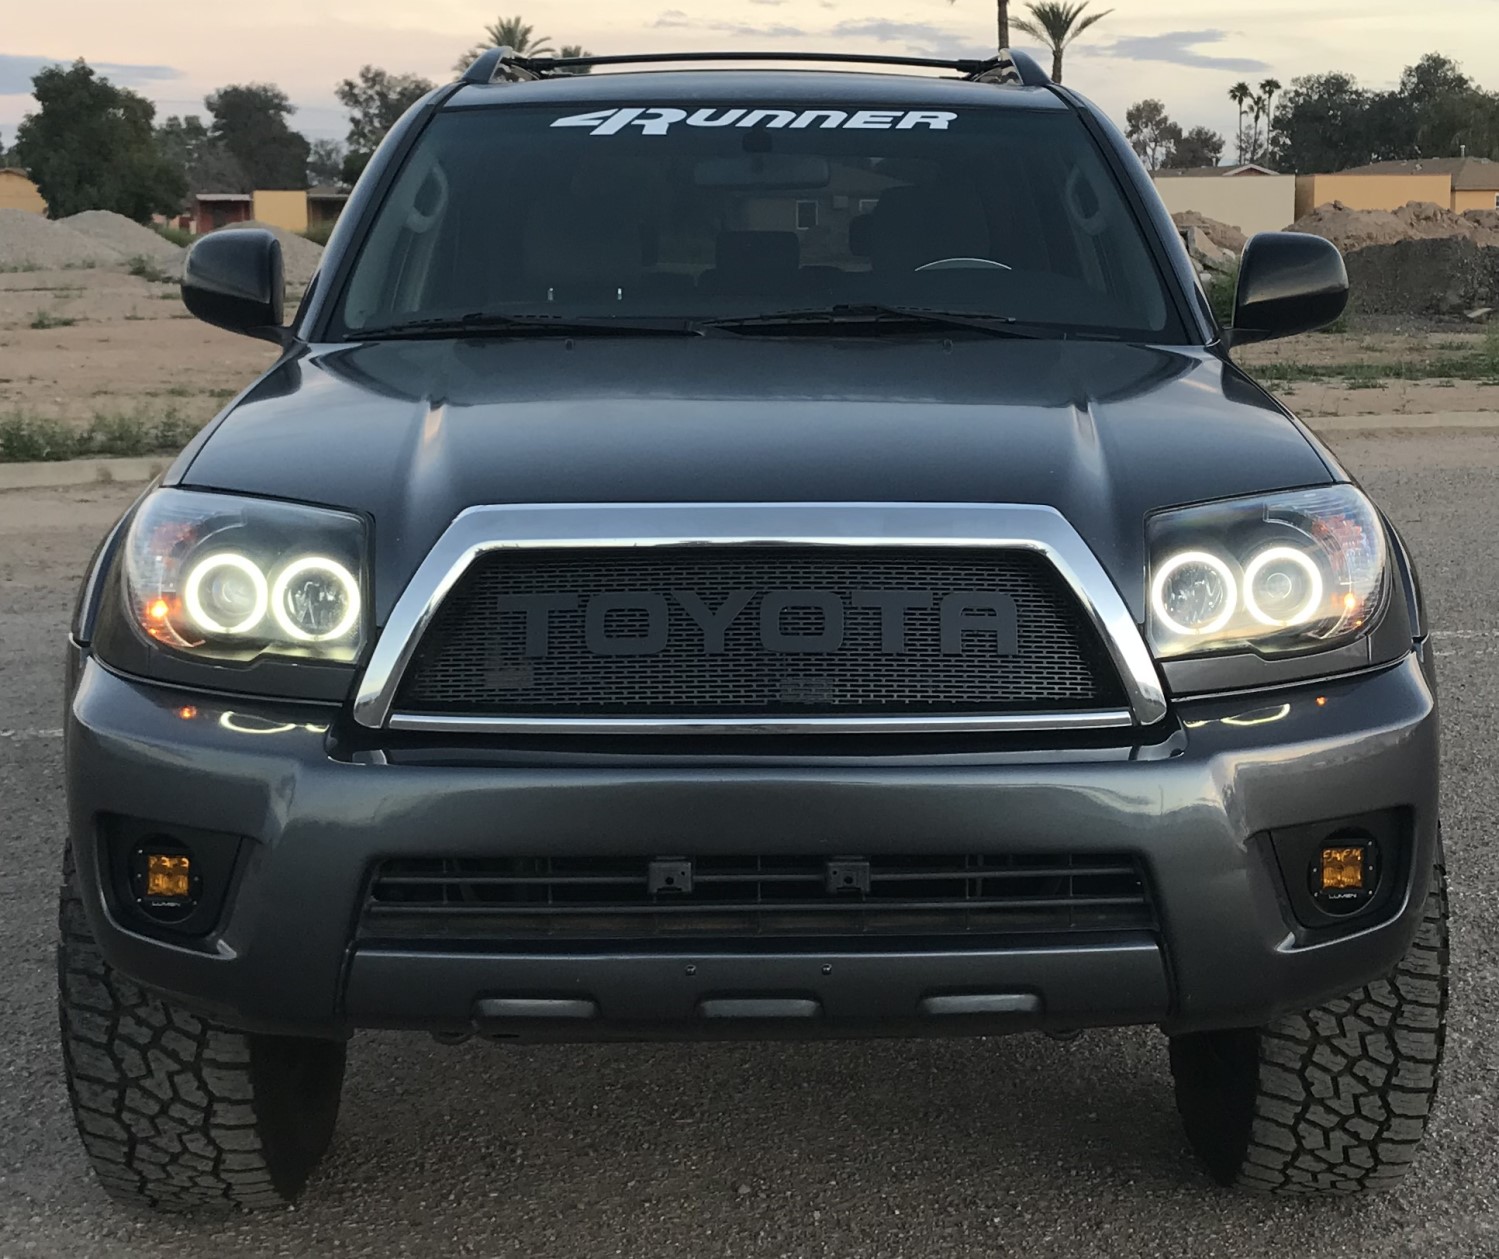 2006 - 2009 Toyota 4Runner Grill Mesh with Big Letters #3